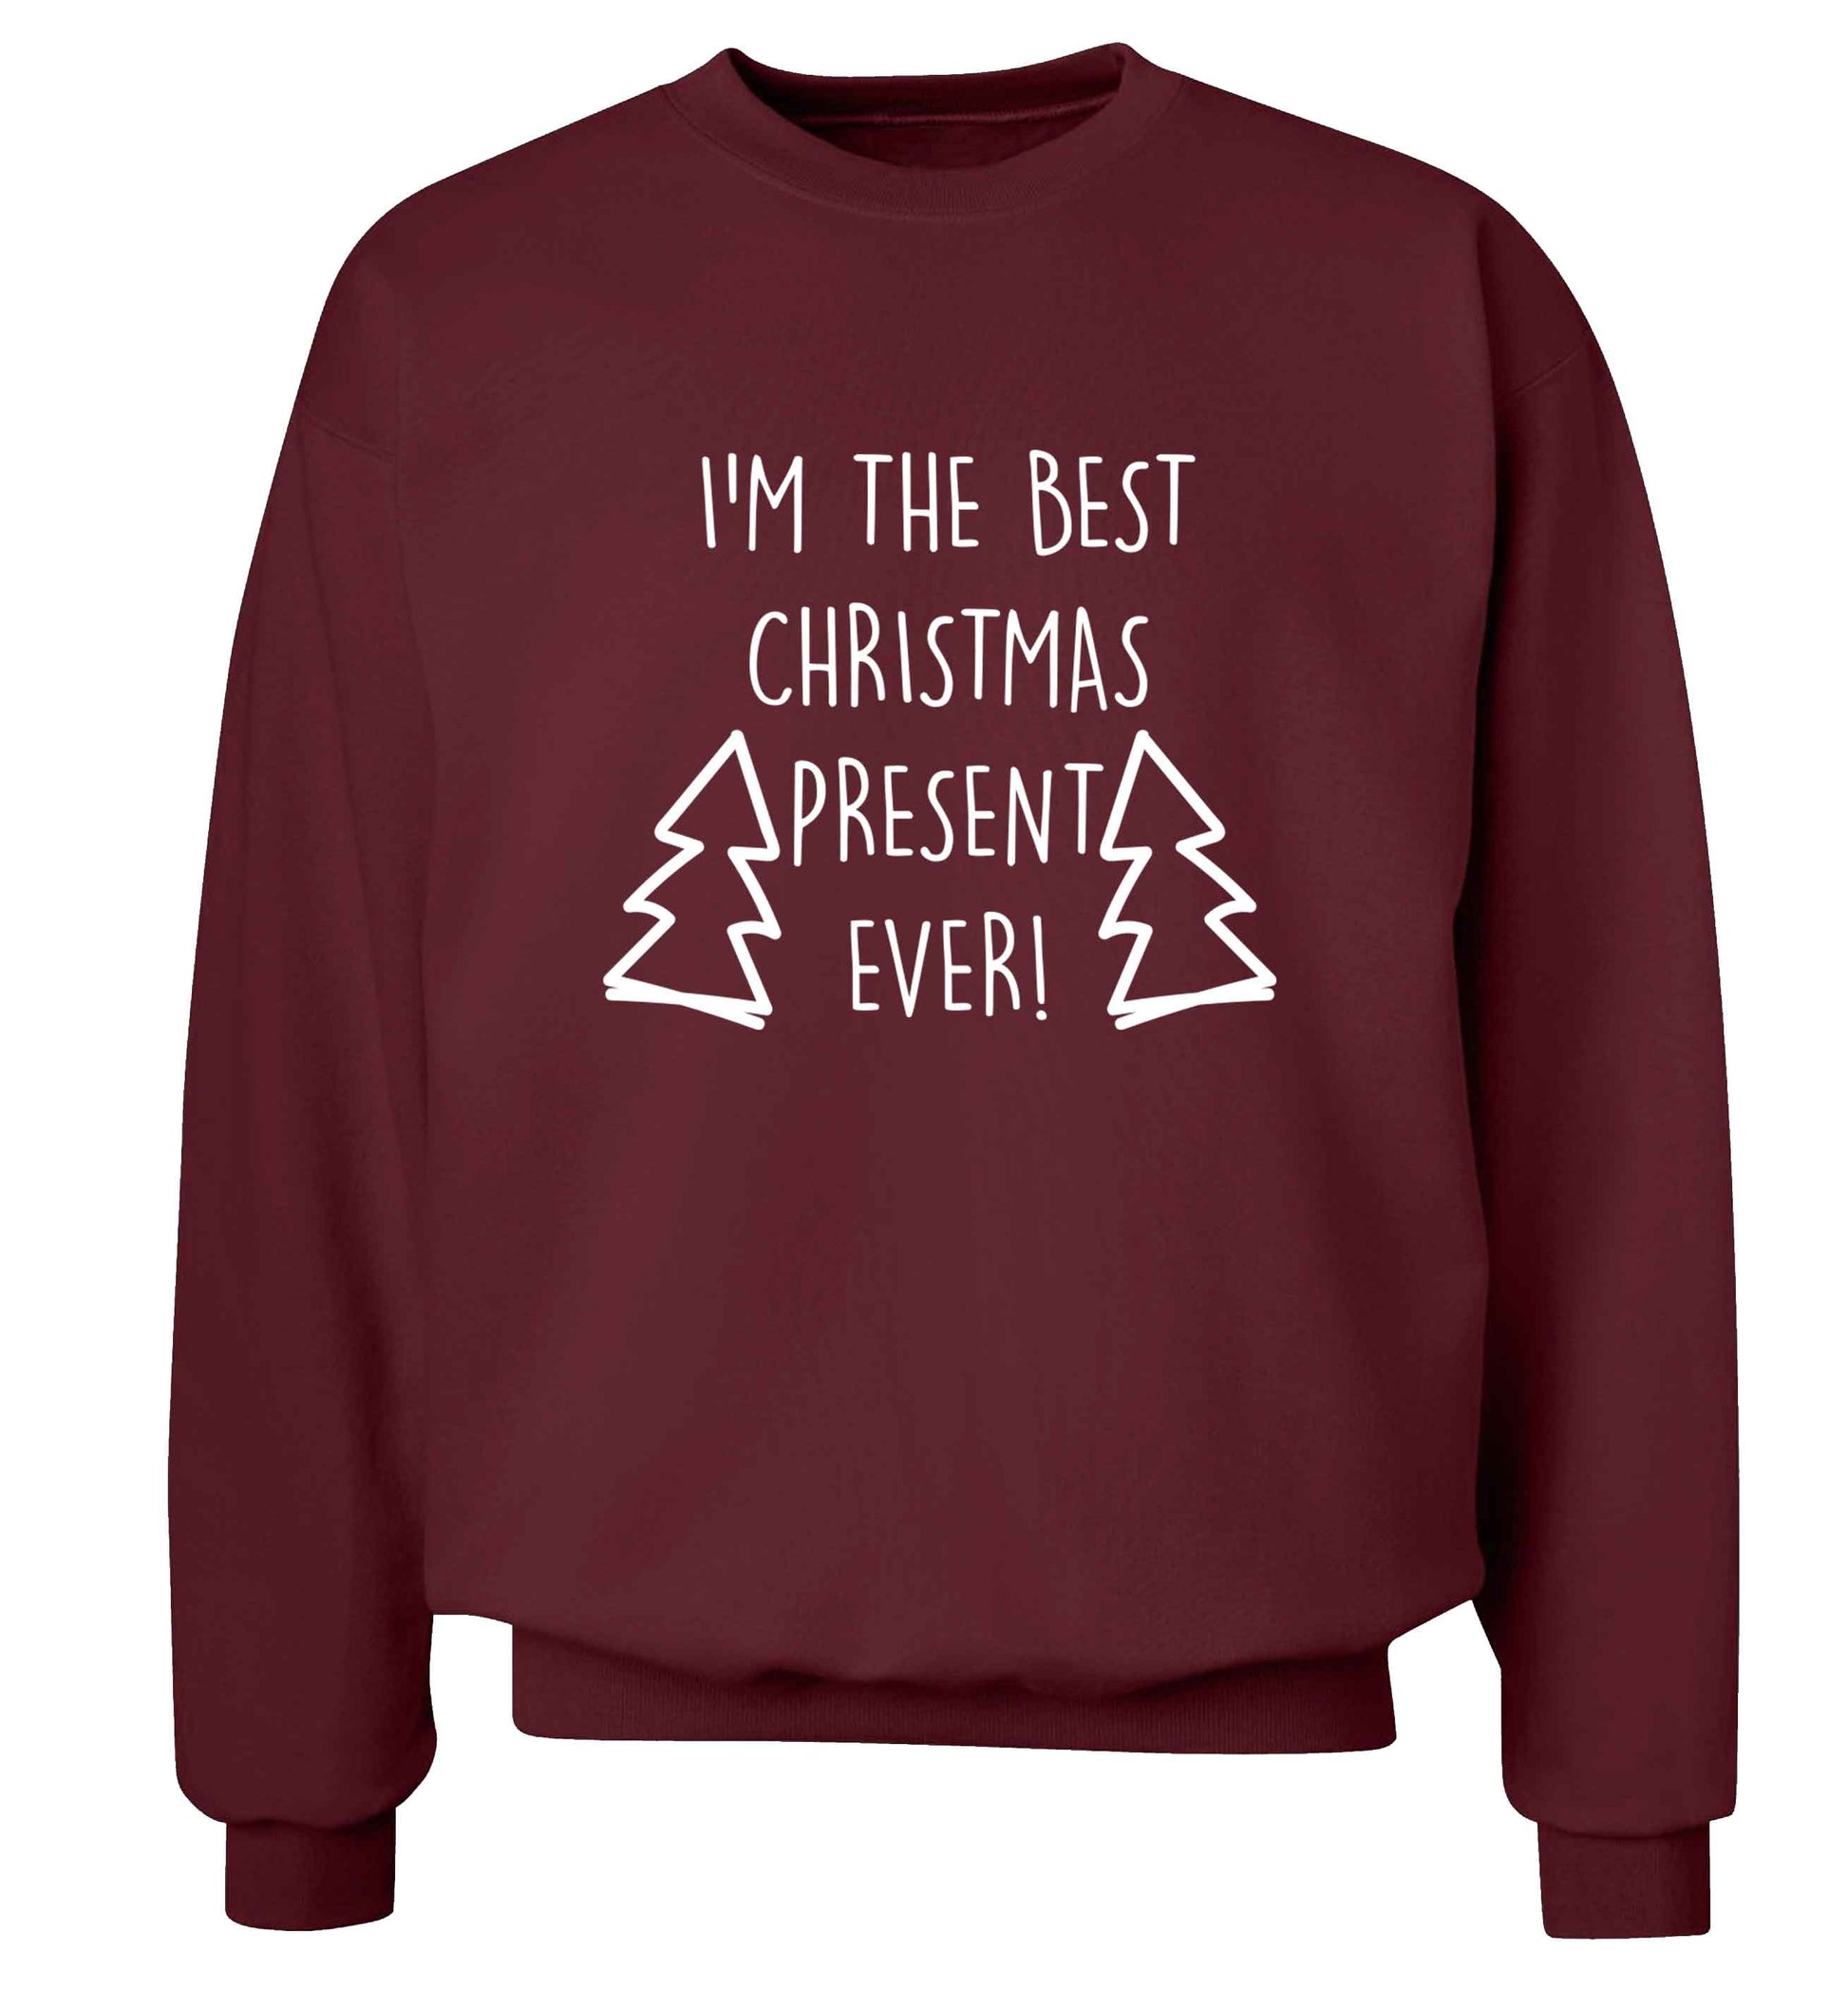 I'm the best Christmas present ever adult's unisex maroon sweater 2XL